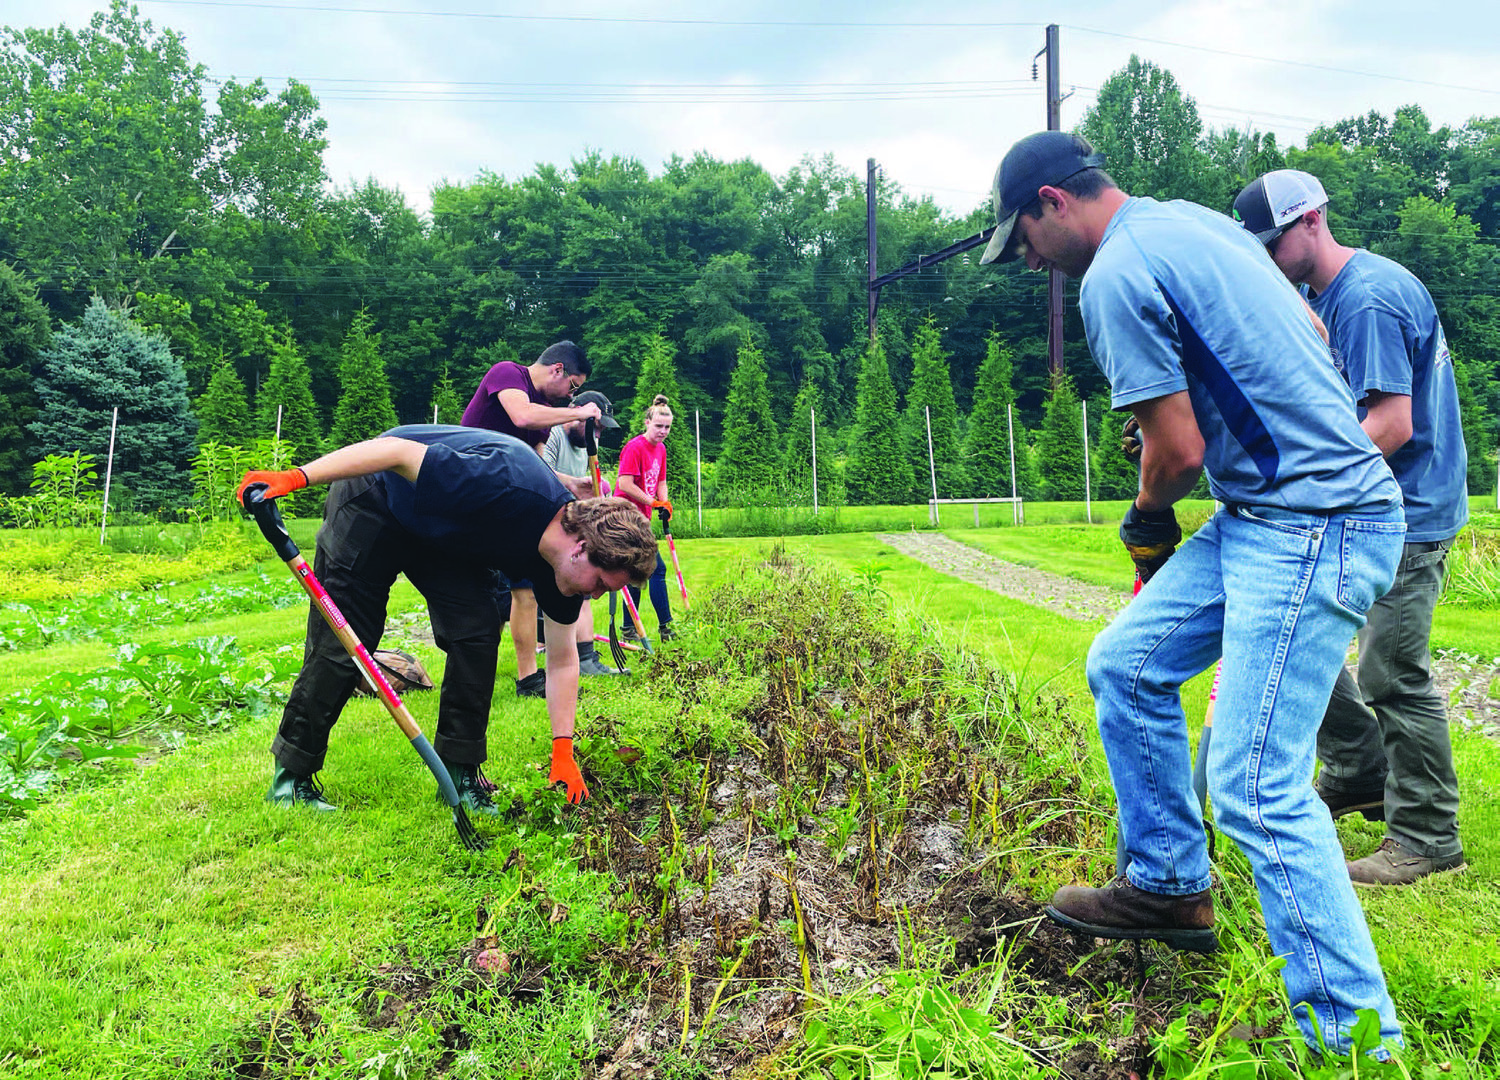 August: Delaware Valley University students help harvest produce at Promised Land Organic Farm in Yardley. All the food will be given to the Penndel Food Pantry in honor of Jackie Hansen, co-owner and operator of the farm.